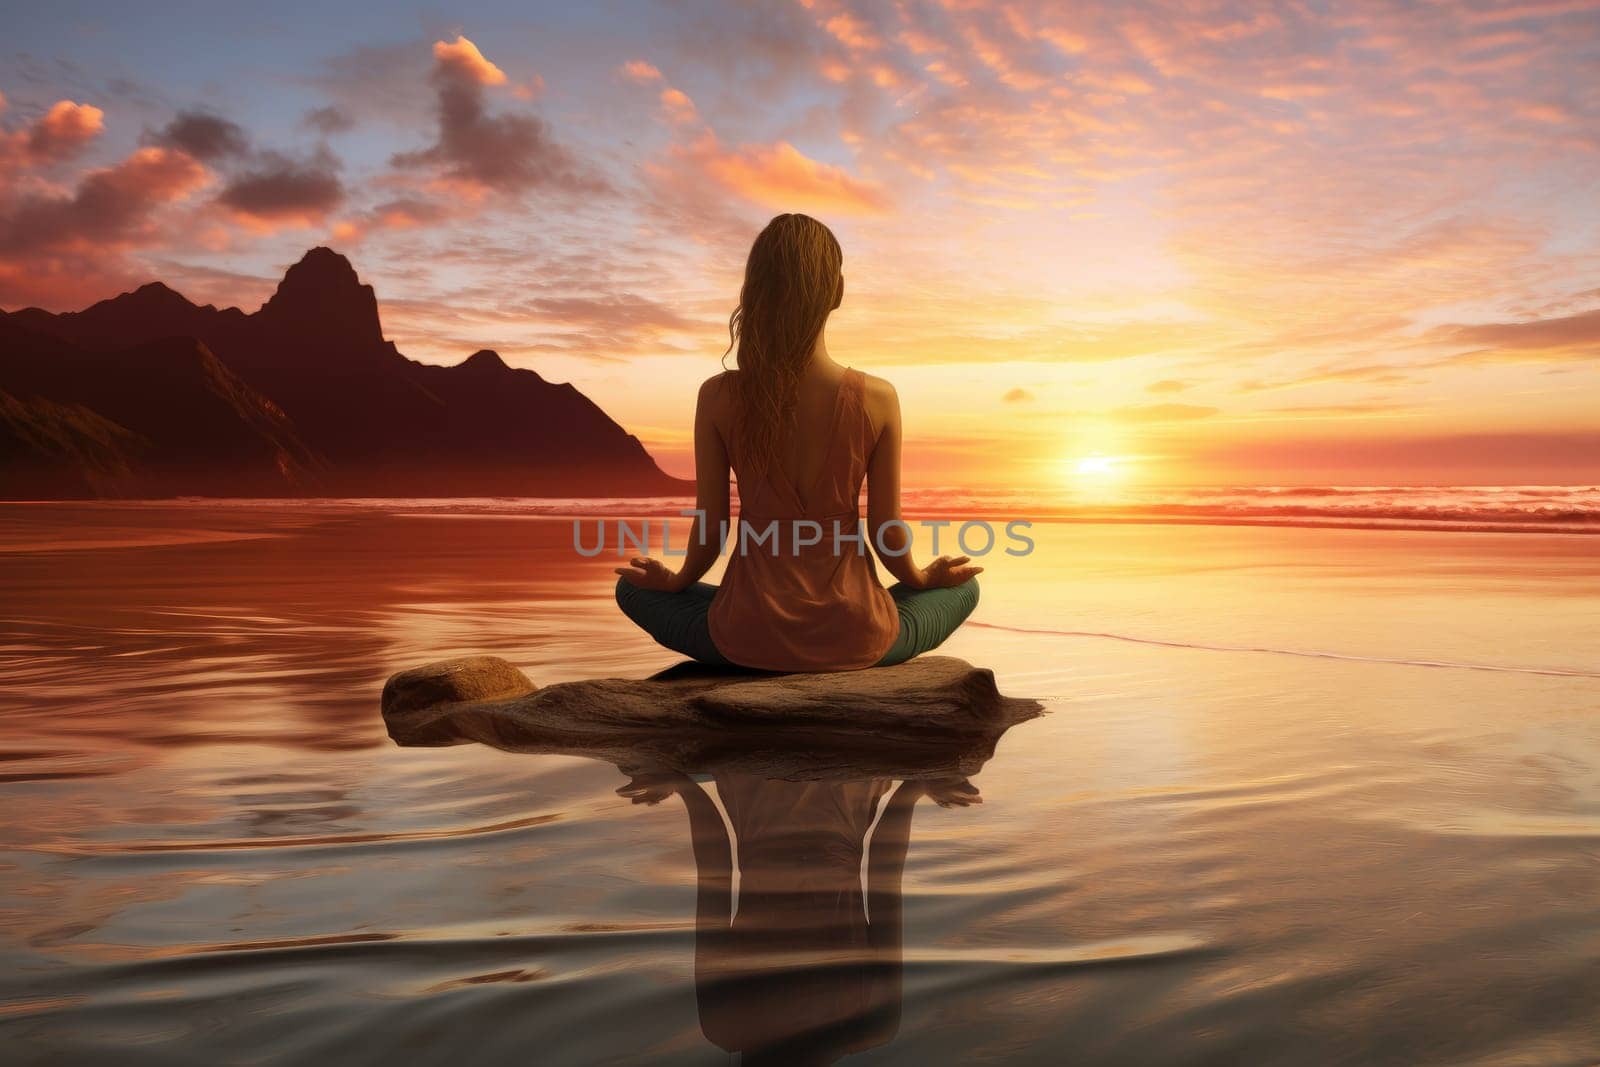 Sunset Yoga Silhouette - Calm Meditation at Dusk Stock Photography by Yurich32